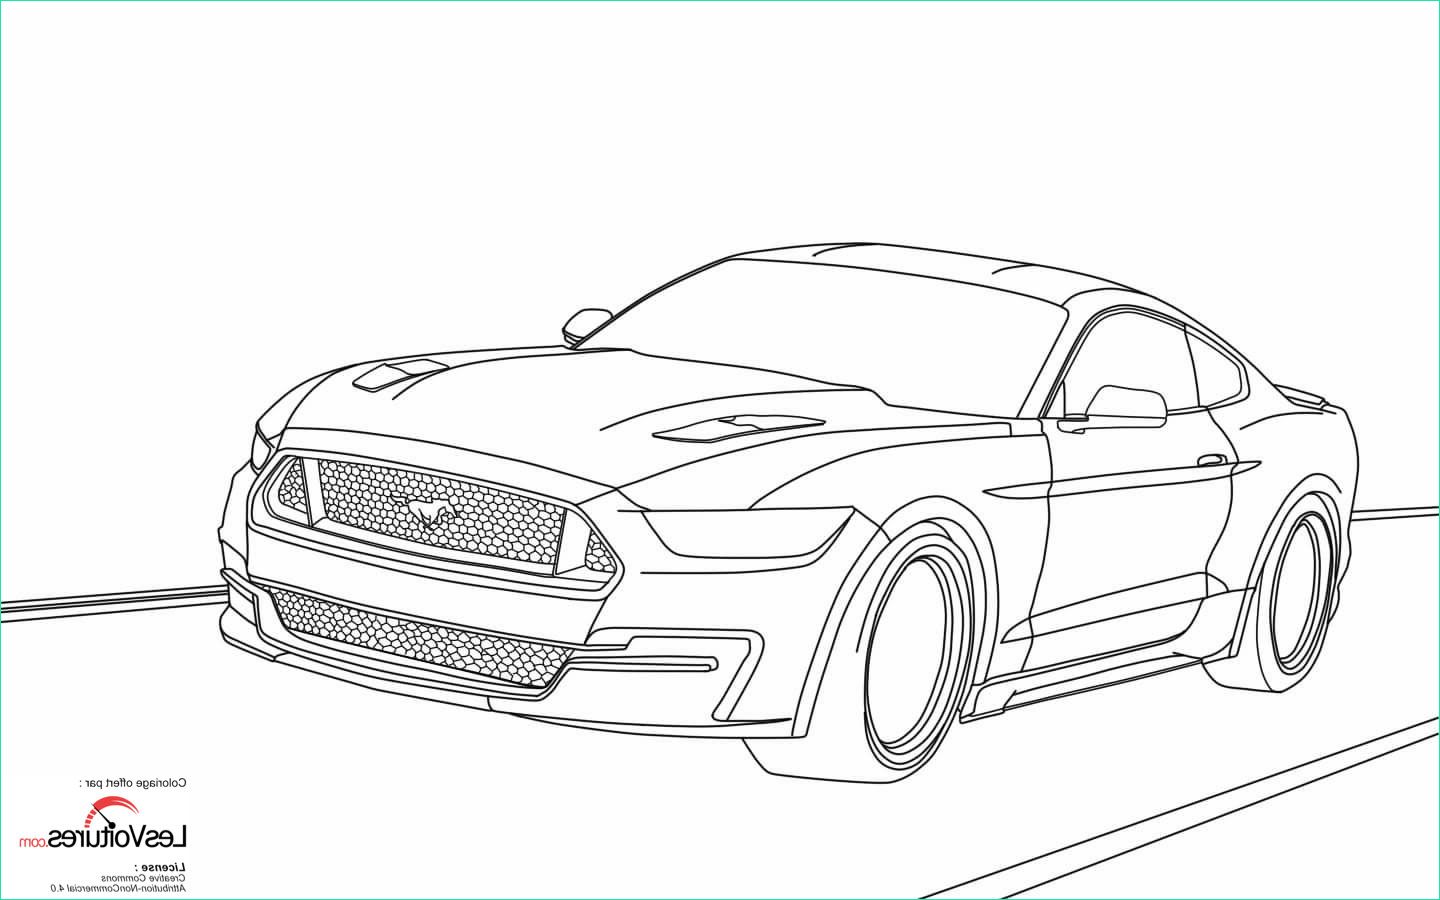 Coloriages Voitures Beau Stock ford Mustang 2015 Coloriage Voiture